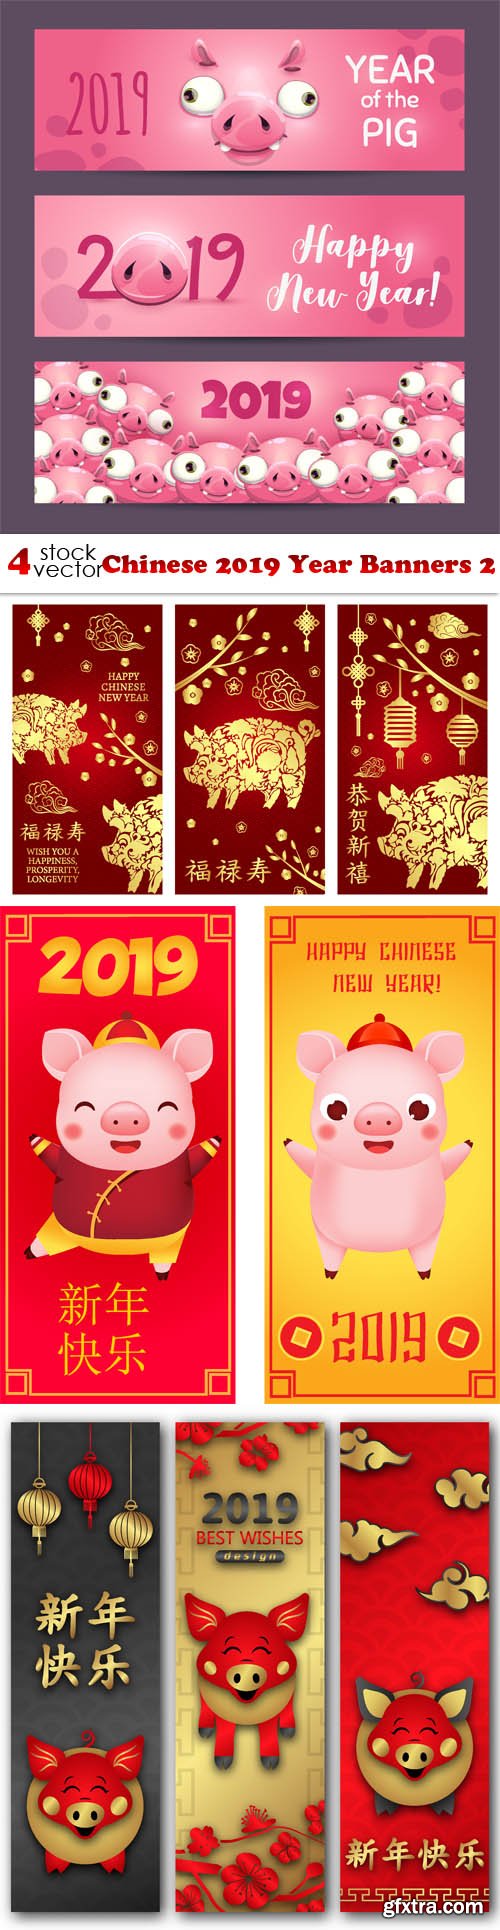 Vectors - Chinese 2019 Year Banners 2